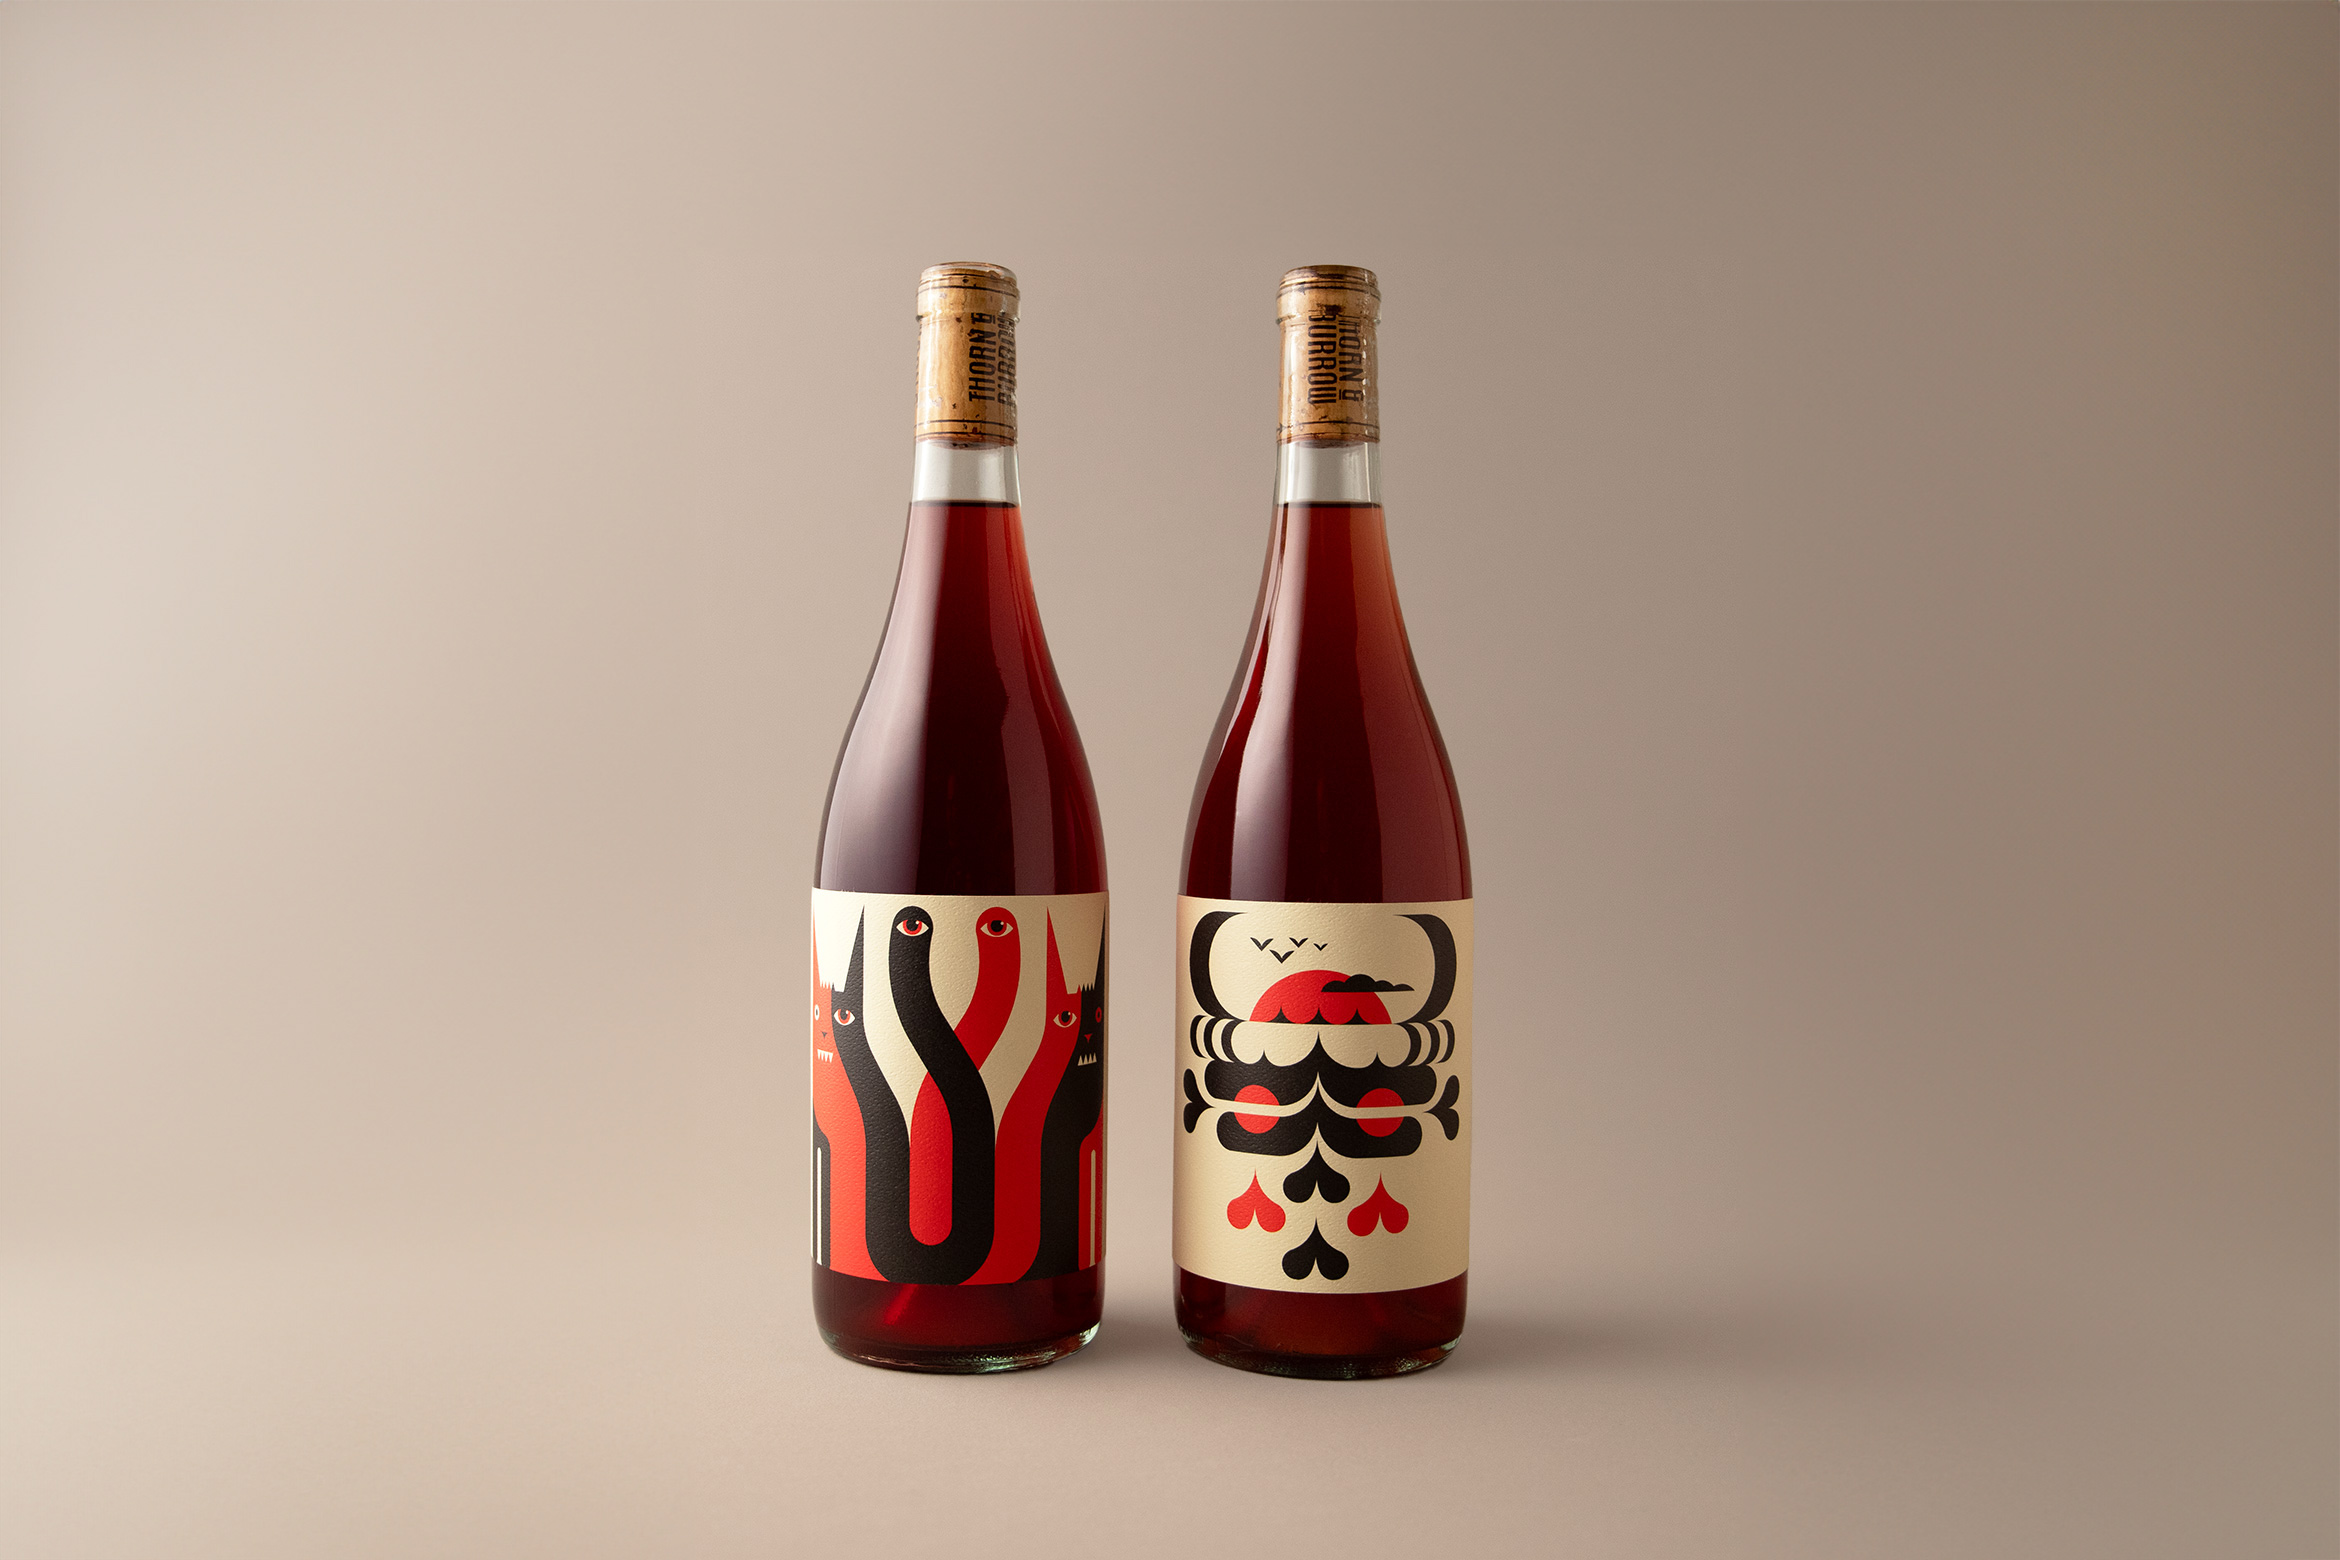 2 bottles of red wine with funky label designs